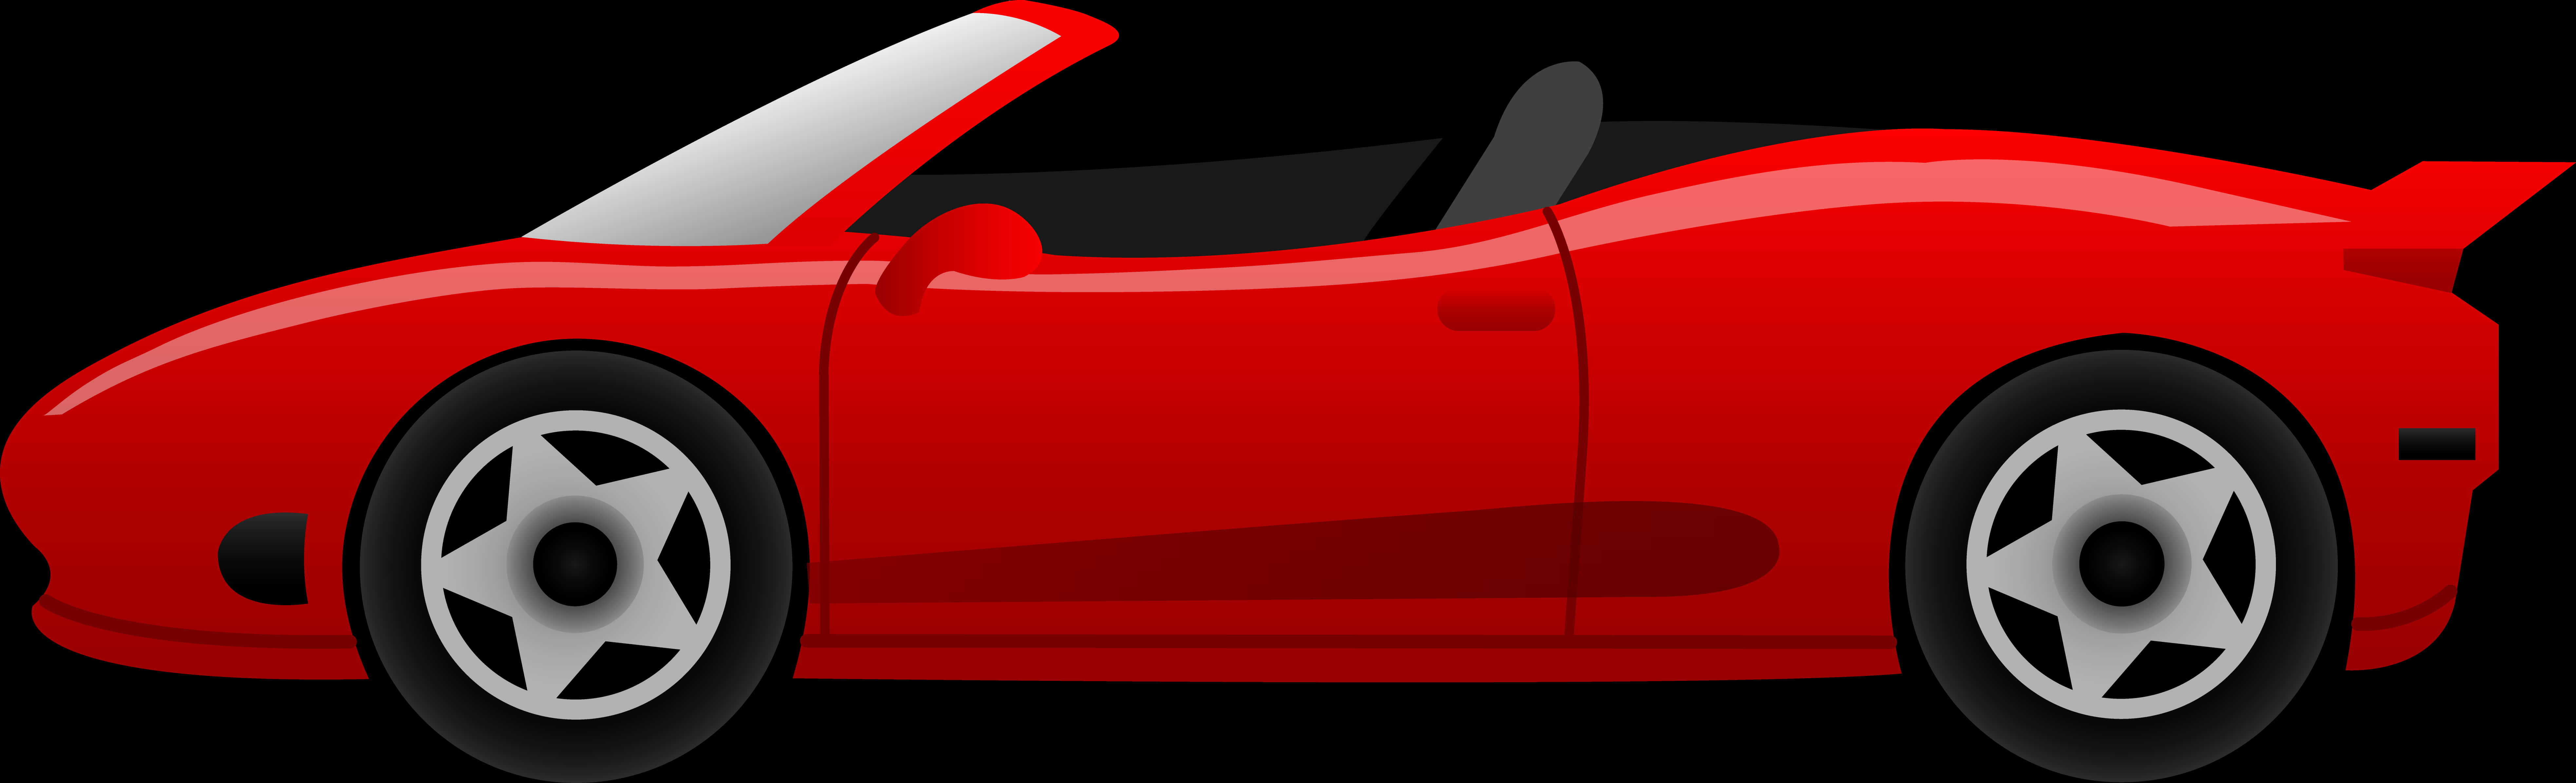 Sports Car Png Image Hd - Car Clipart Transparent Background, Png Download